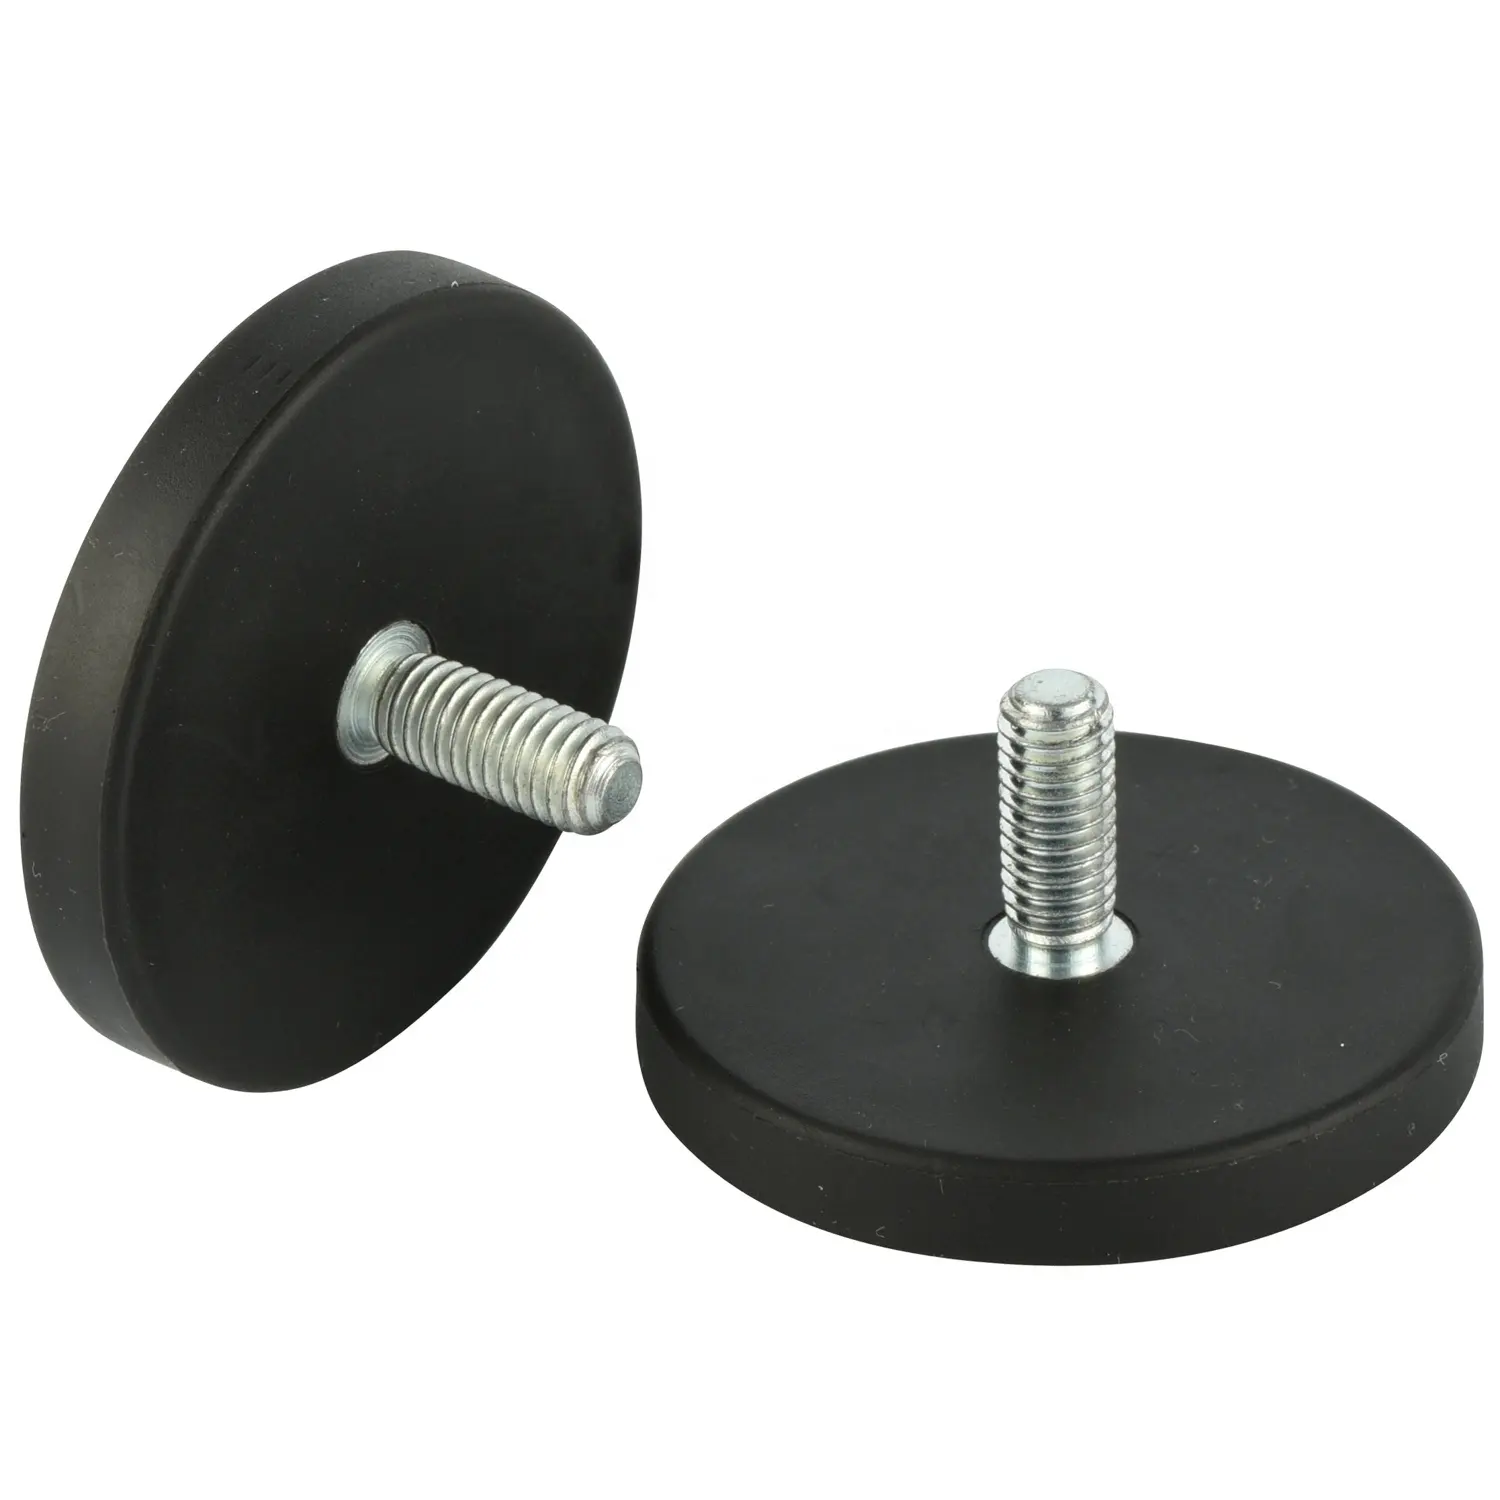 High Quality Black Or Custom Rubber Pot Magnets With Threaded Holes M6 M8